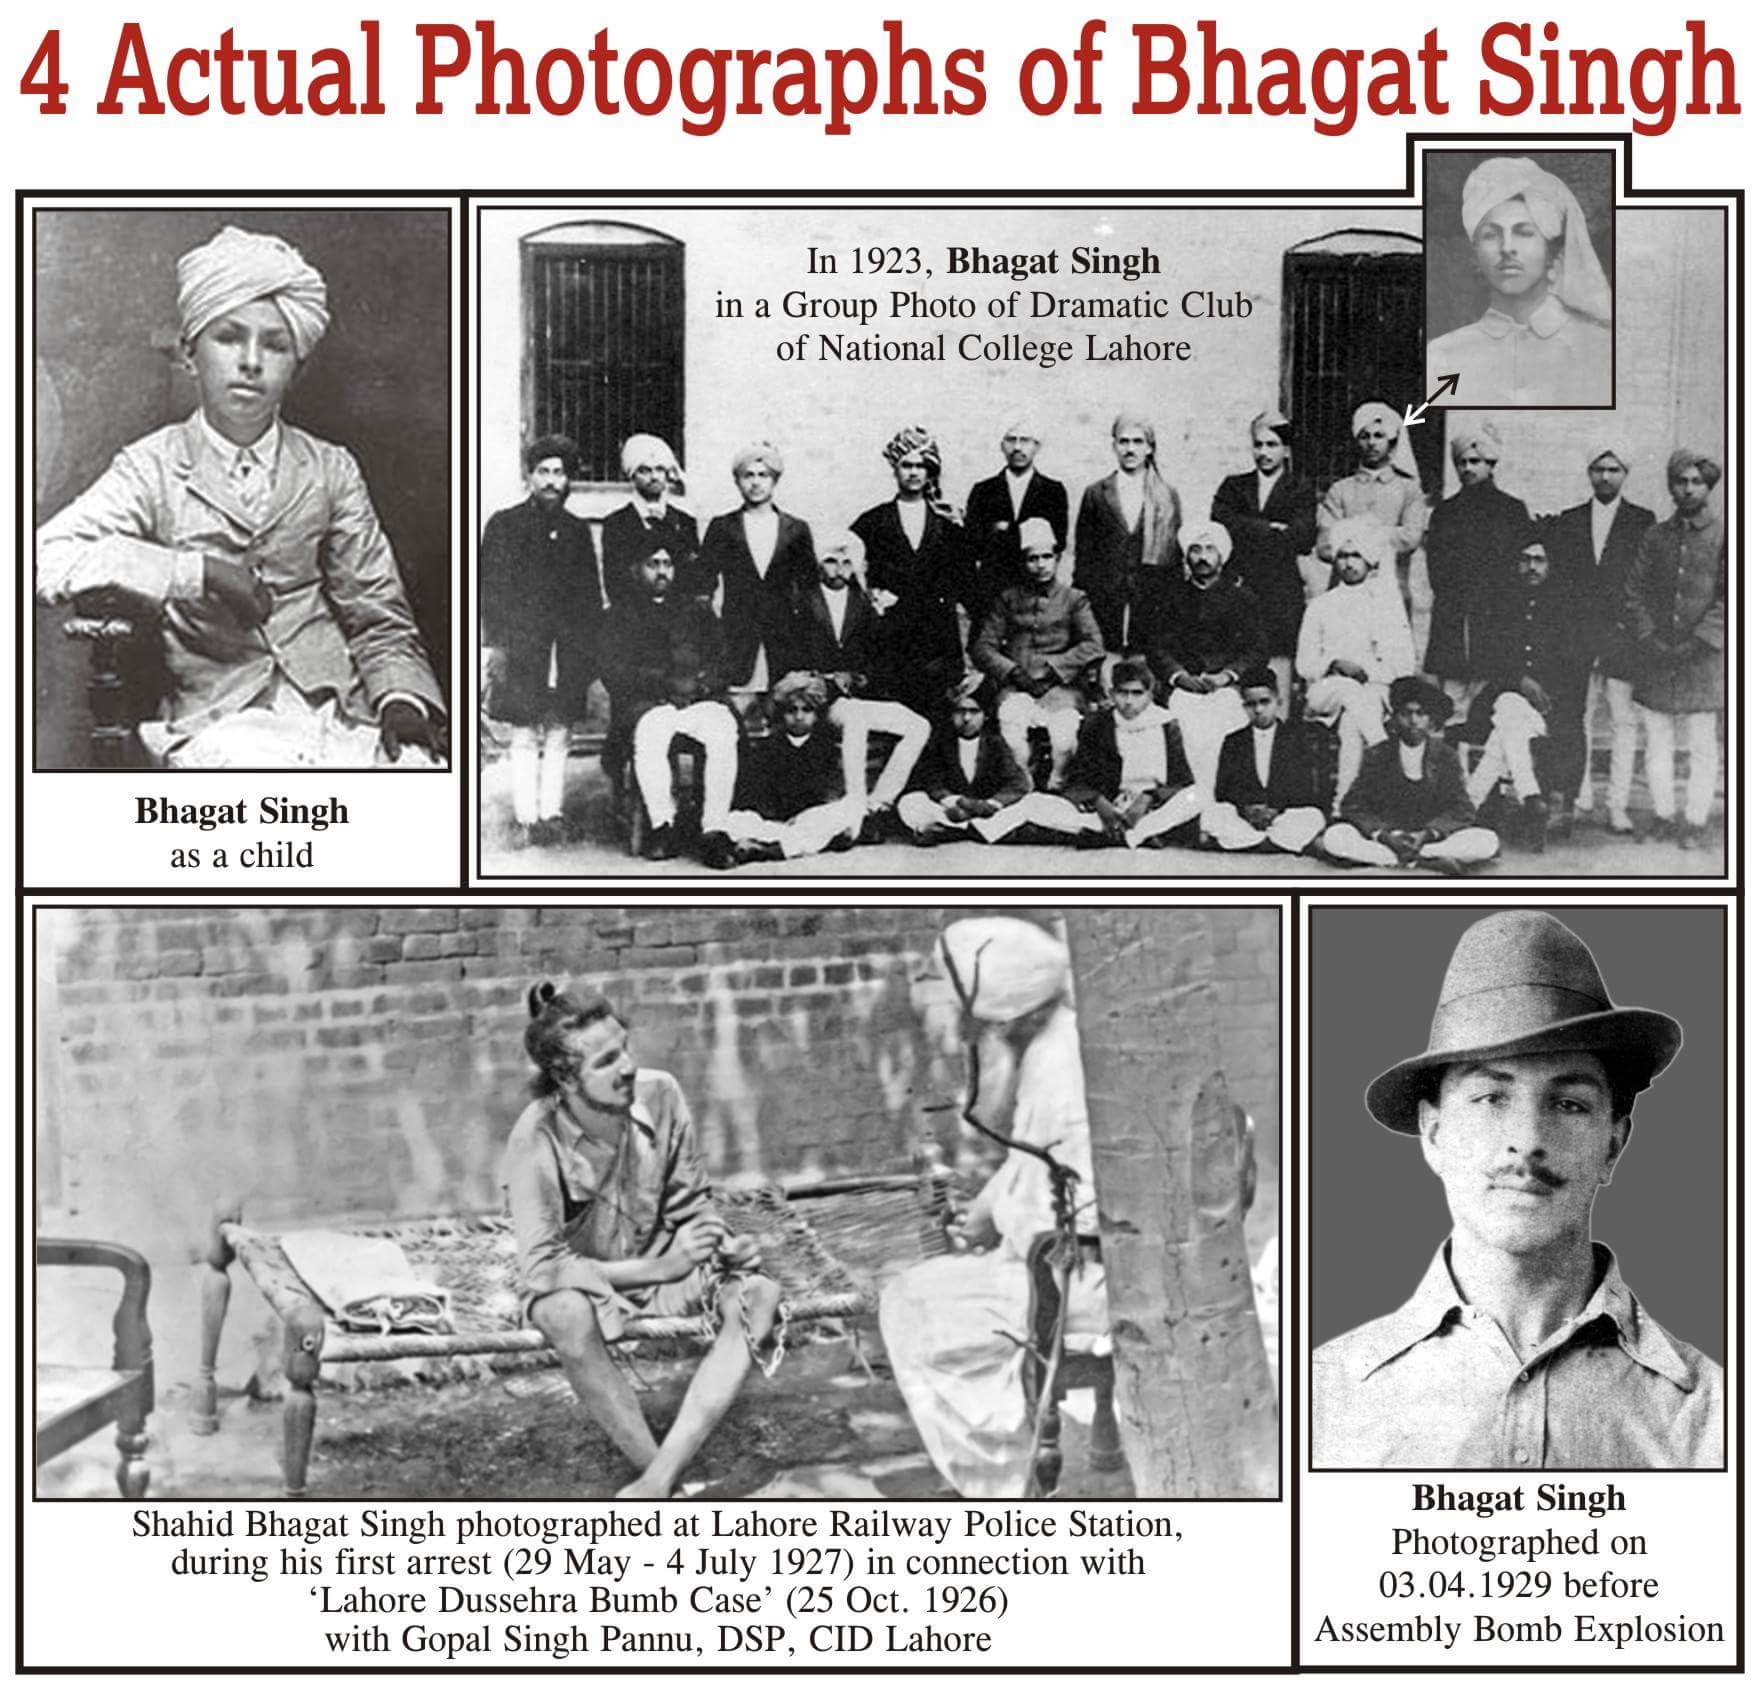 Actual photographs of Bhagat Singh